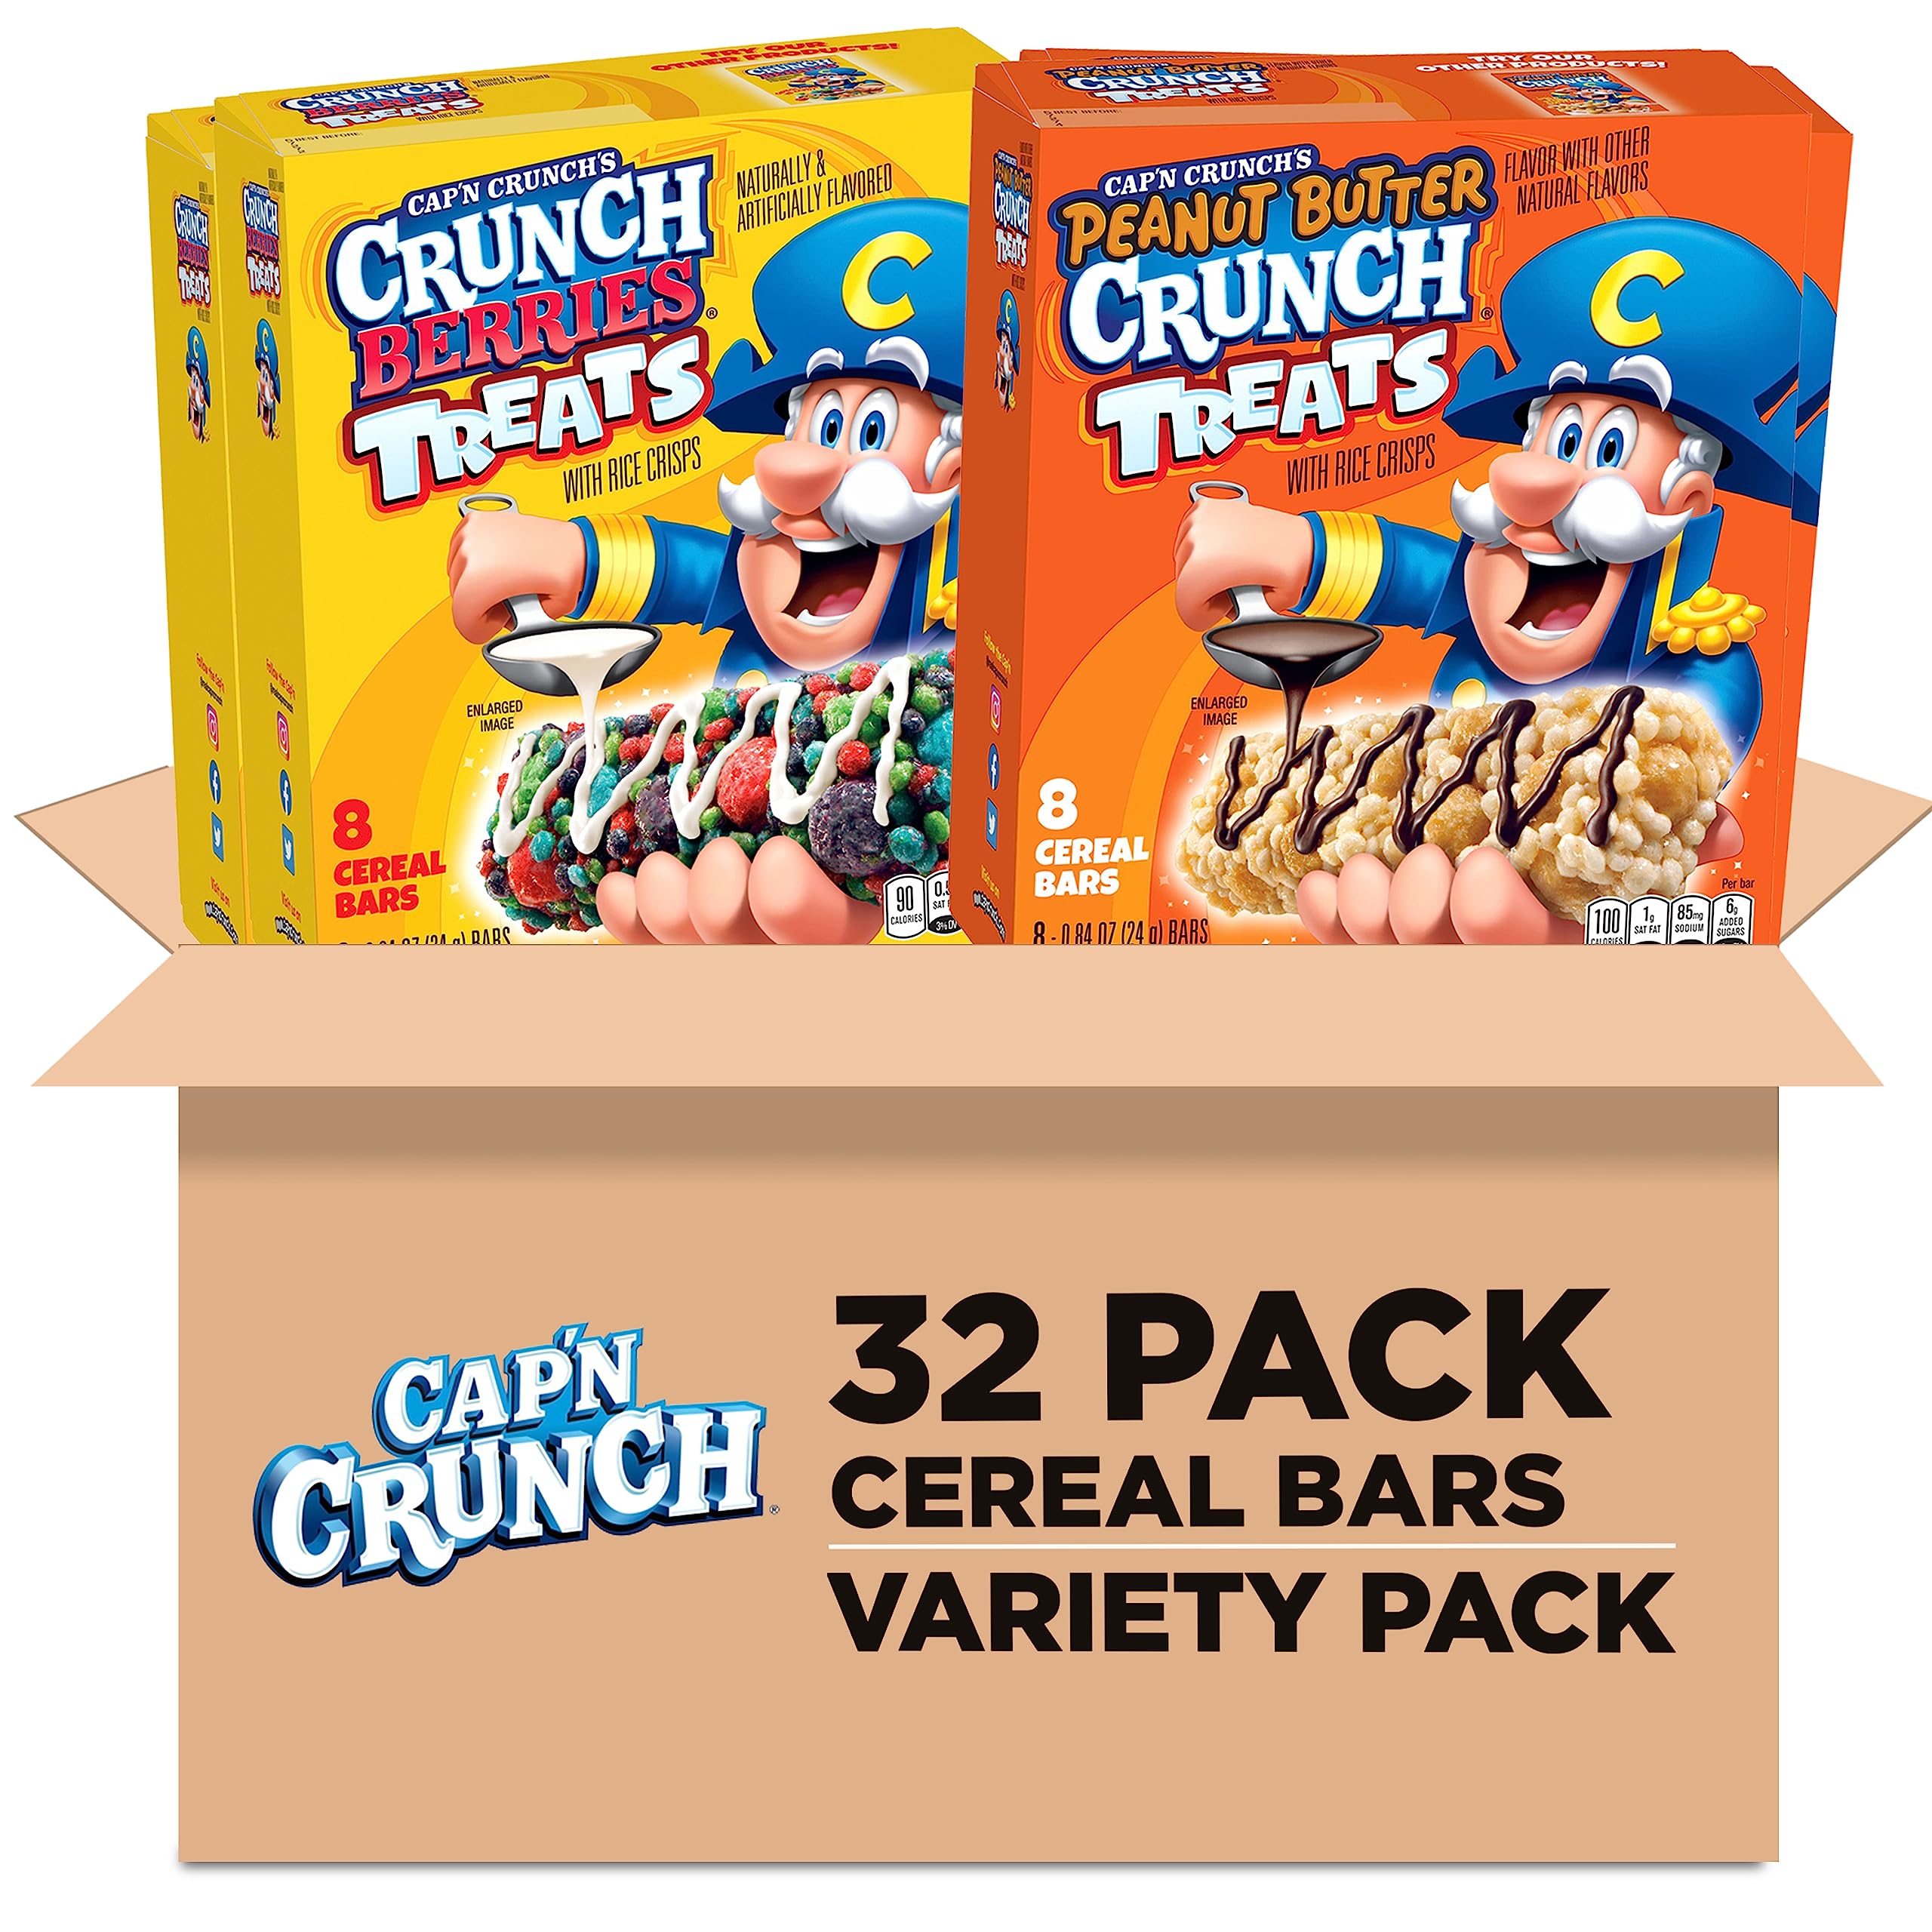 32-Count Quaker Cap'n Crunch Treat Bars 2-Flavor Variety Pack (Peanut Butter Crunch & Crunch Berries) $9.41 w/ S&S + Free Shipping w/ Prime or on orders over $35